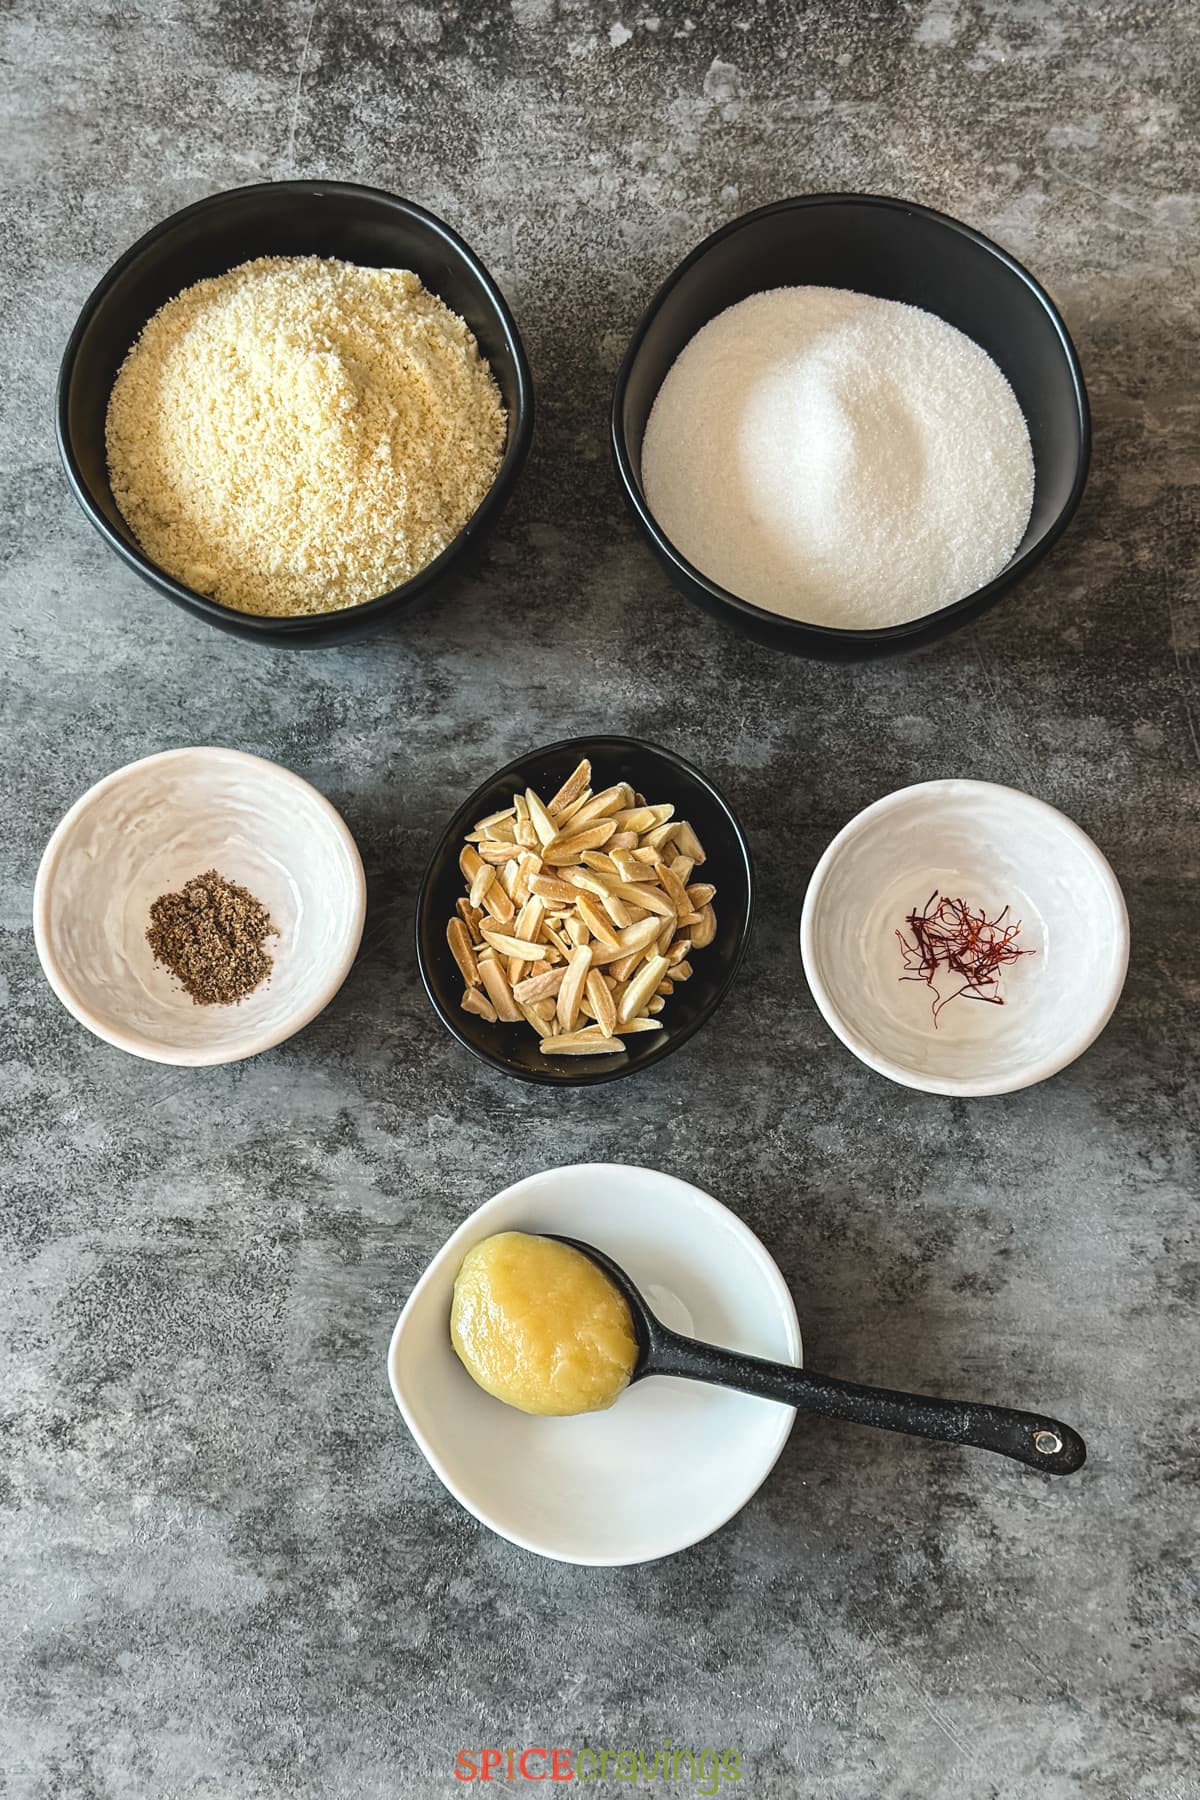 Almond flour, sugar, cardamom among other ingredients in bowls on grey board